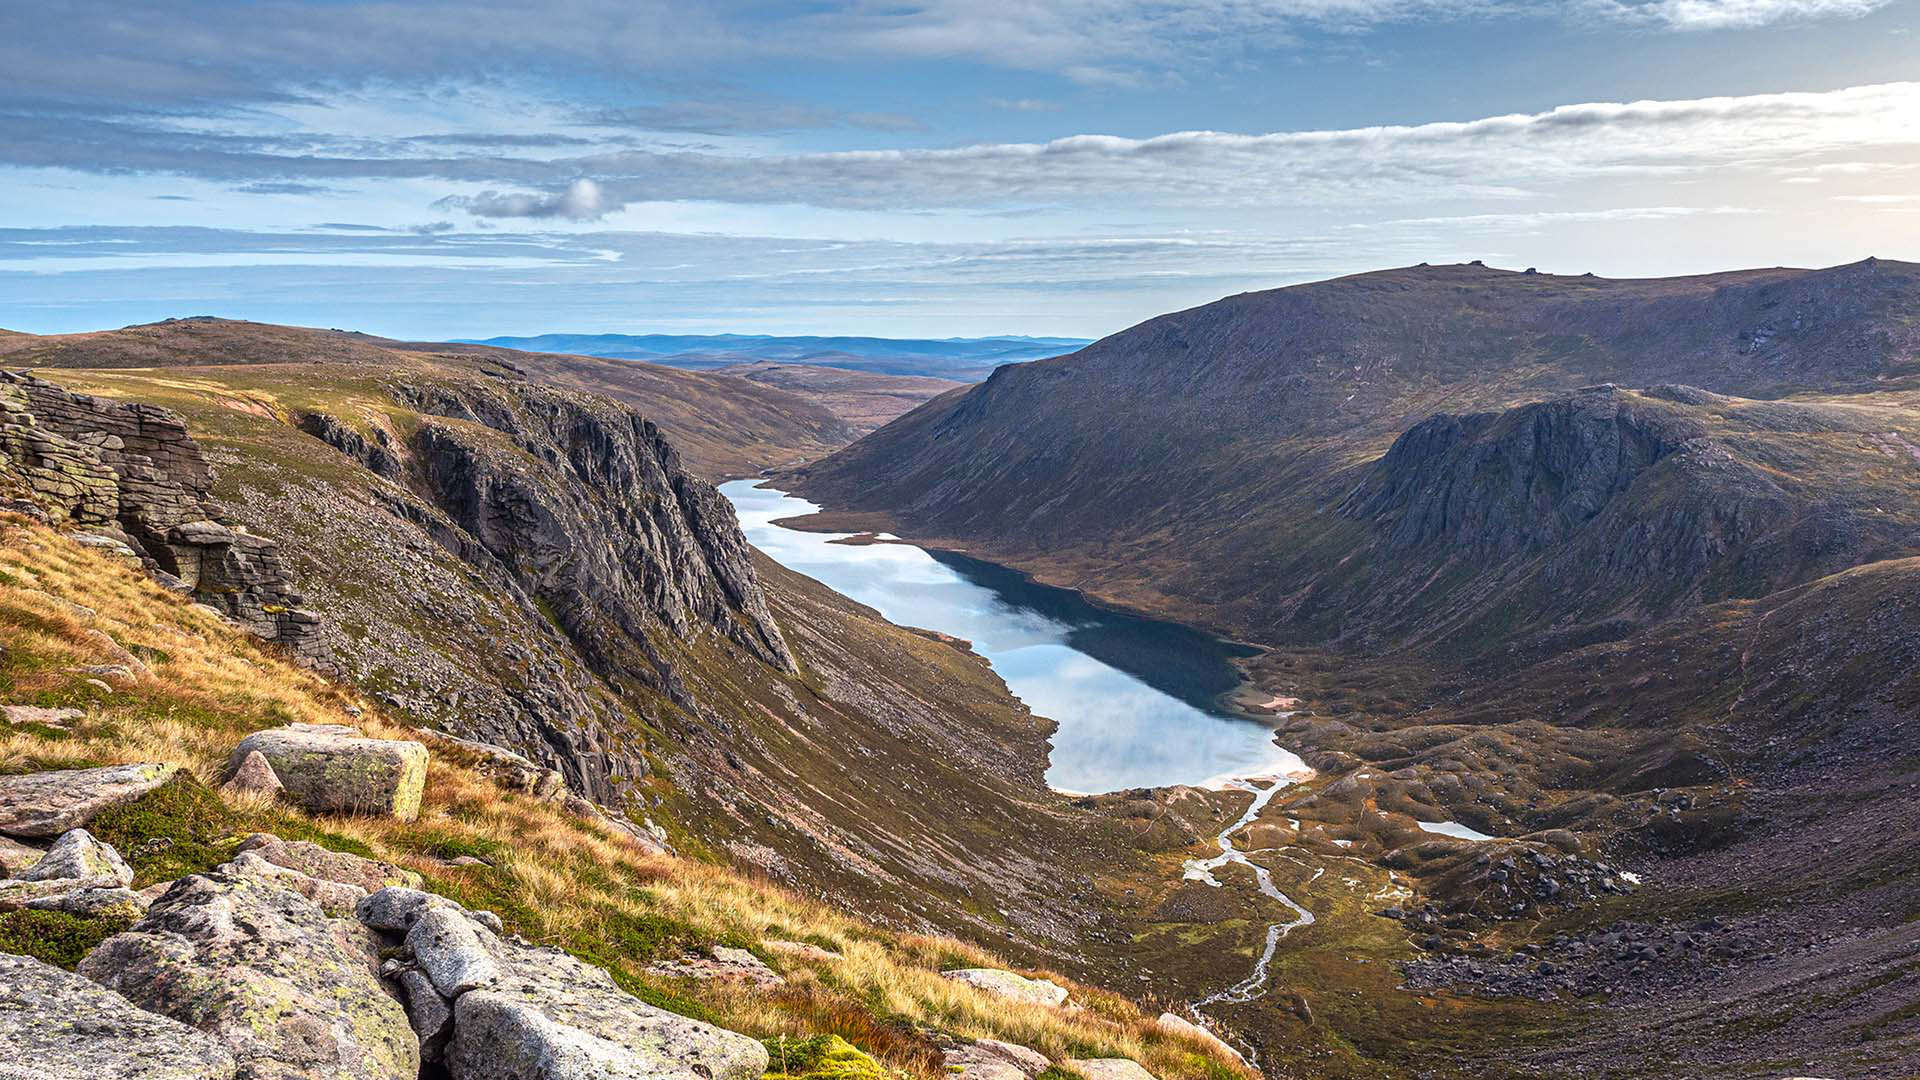 A scenic route of Scotland’s Cairngorms National Park